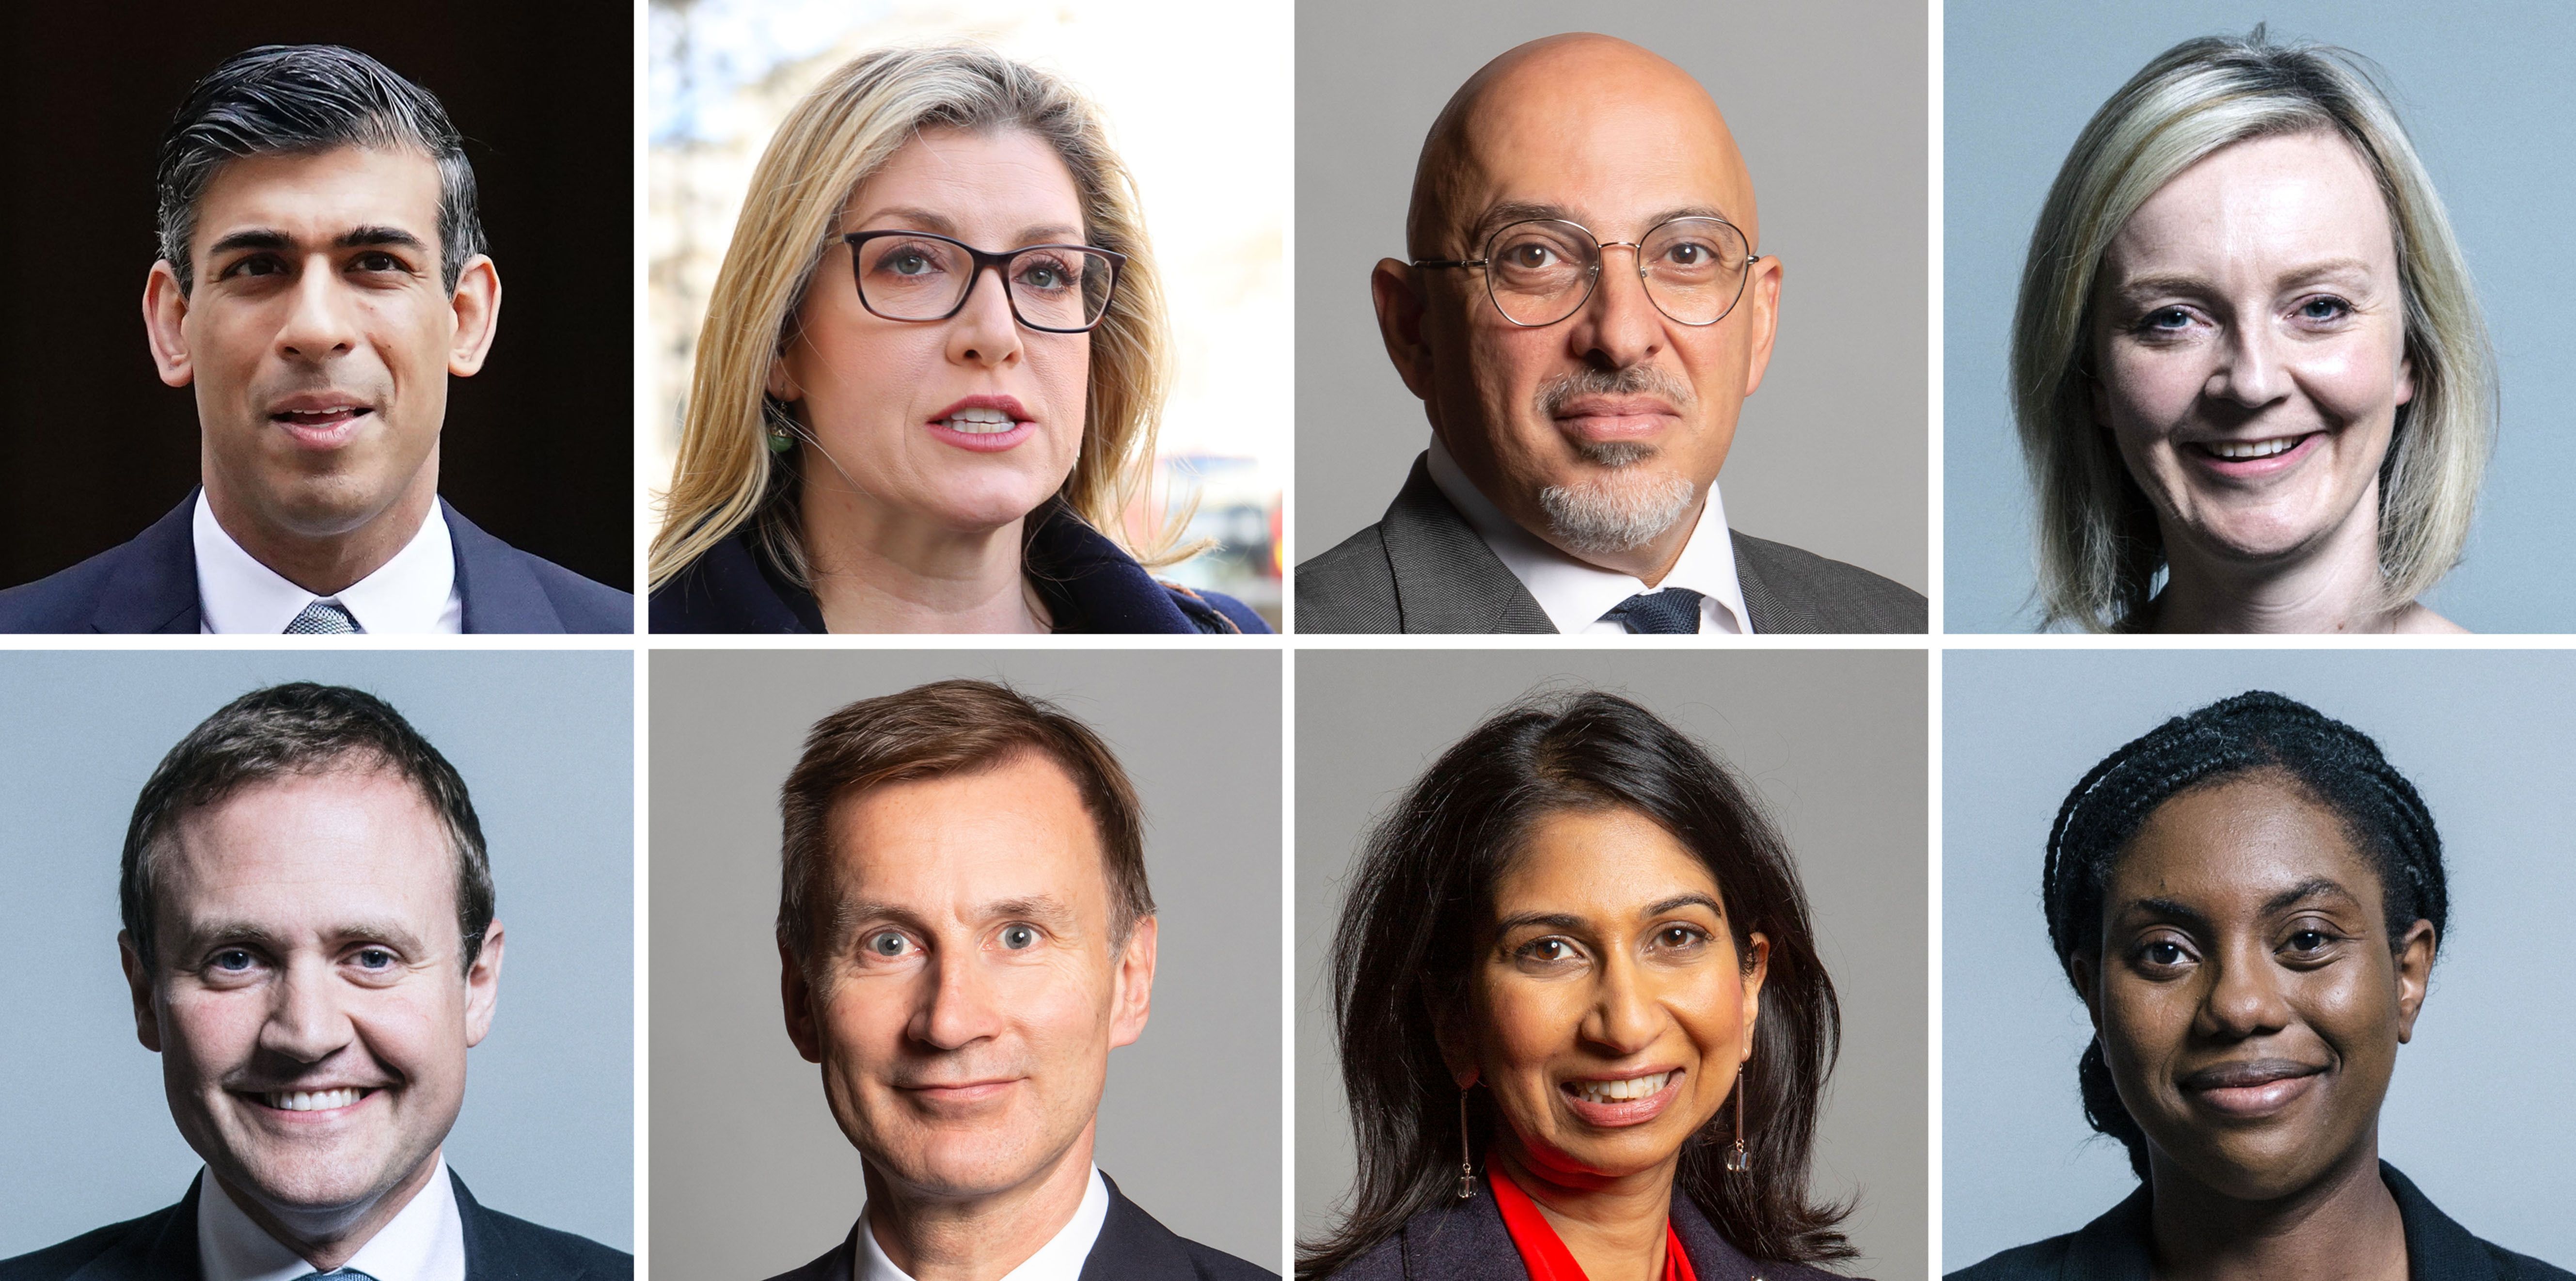 UK Parliament handout photos of the eight candidates in the Conservative Party leadership race, (top row left to right), Rishi Sunak, Penny Mordaunt, Nadhim Zahawi, and Liz Truss, (bottom row left to right) Tom Tugendhat, Jeremy Hunt, Suella Braverman and Kemi Badenoch. Tory MPs will have the chance to vote for the eight contenders vying to replace Boris Johnson, as balloting begins to find his successor. Issue date: Wednesday July 13, 2022.